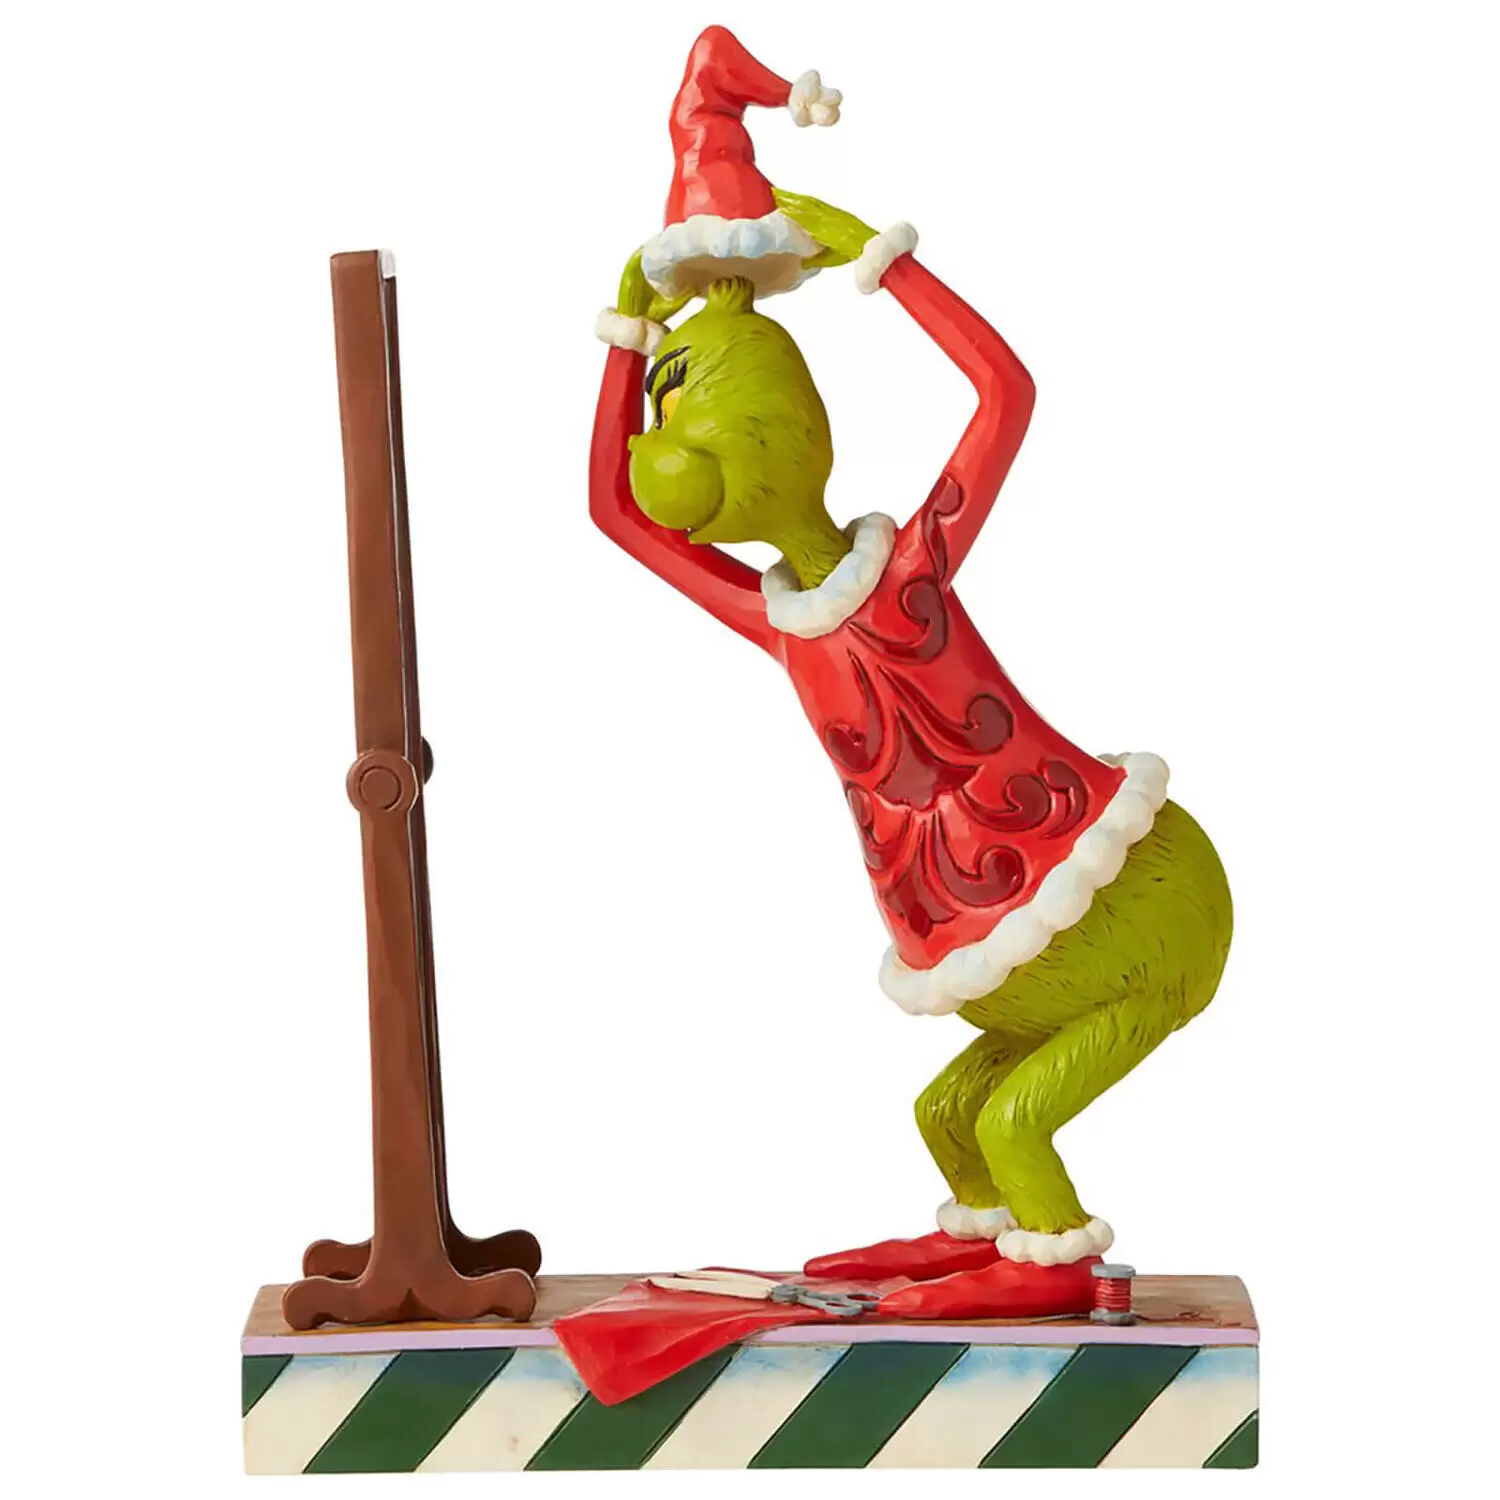 Dr Seuss by Jim Shore - Grinch Getting Dressed in Santa Suit